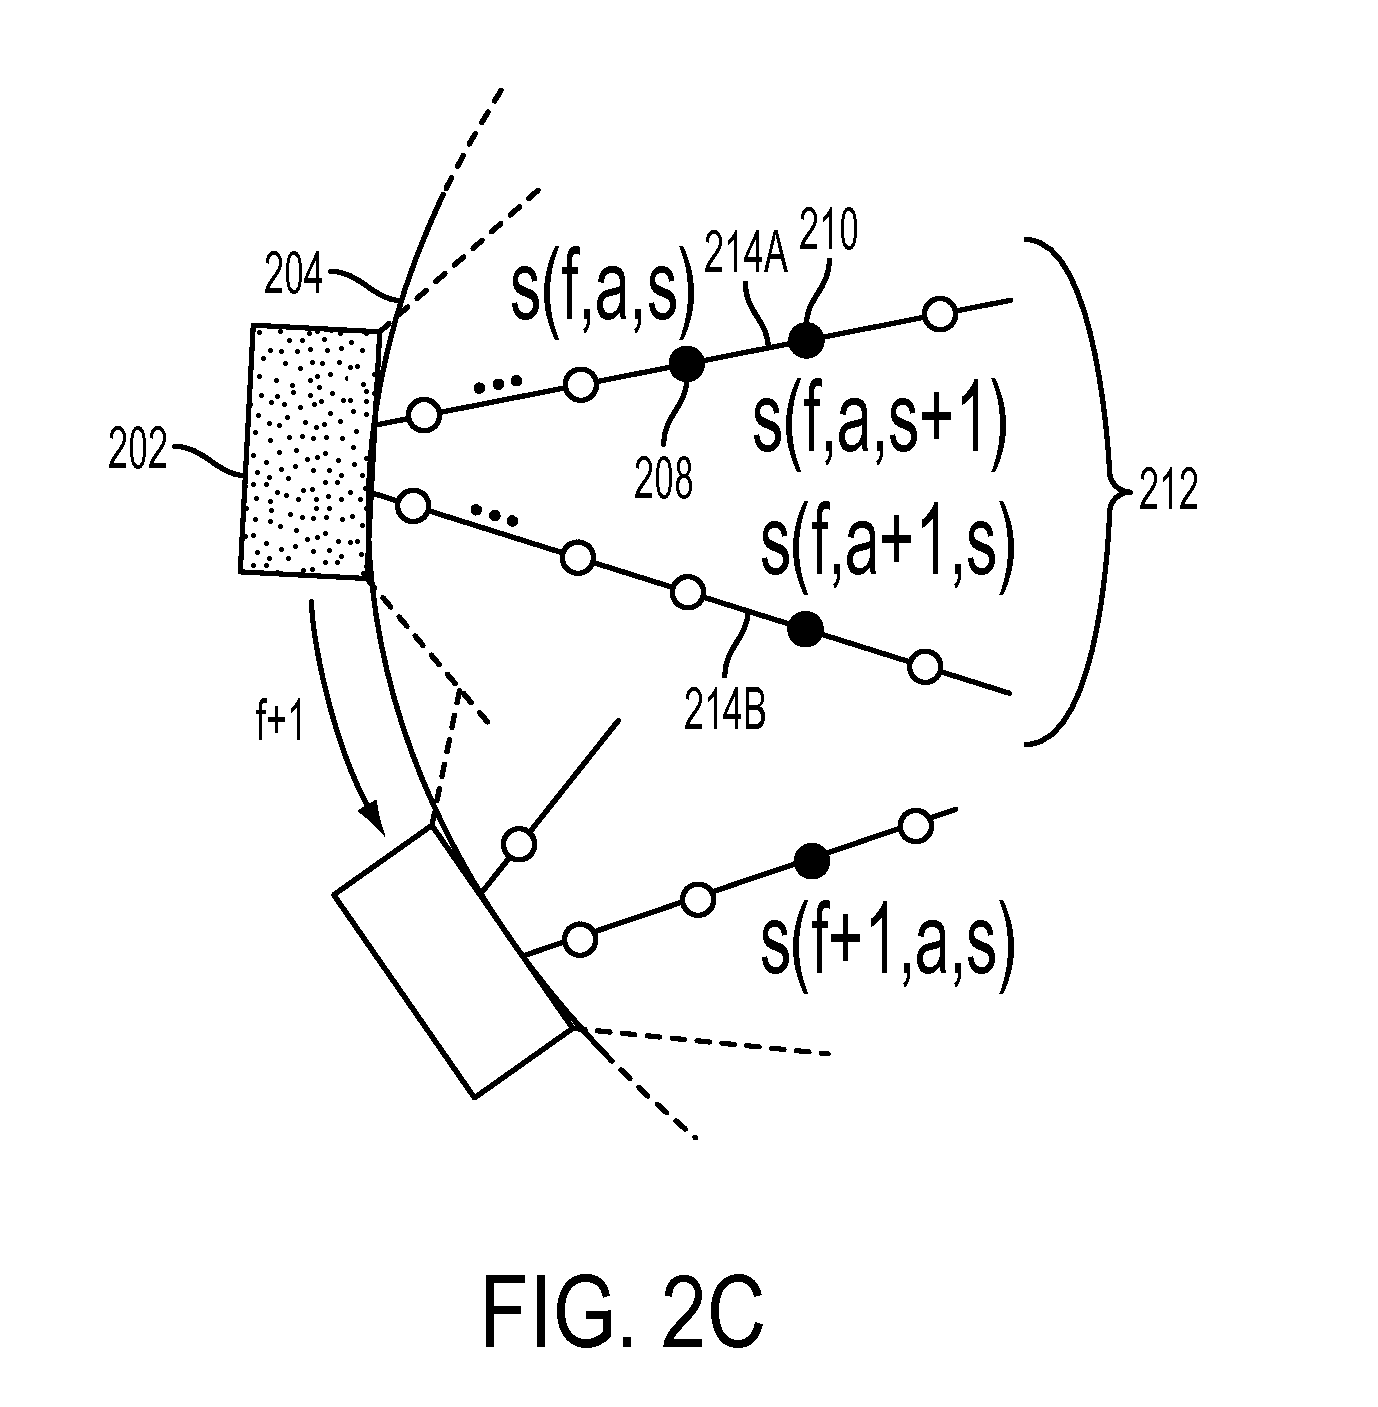 Method and Apparatus for Three-Dimensional Visualization and Analysis for Automatic Non-Destructive Examination of a Solid Rotor using Ultrasonic Phased Array